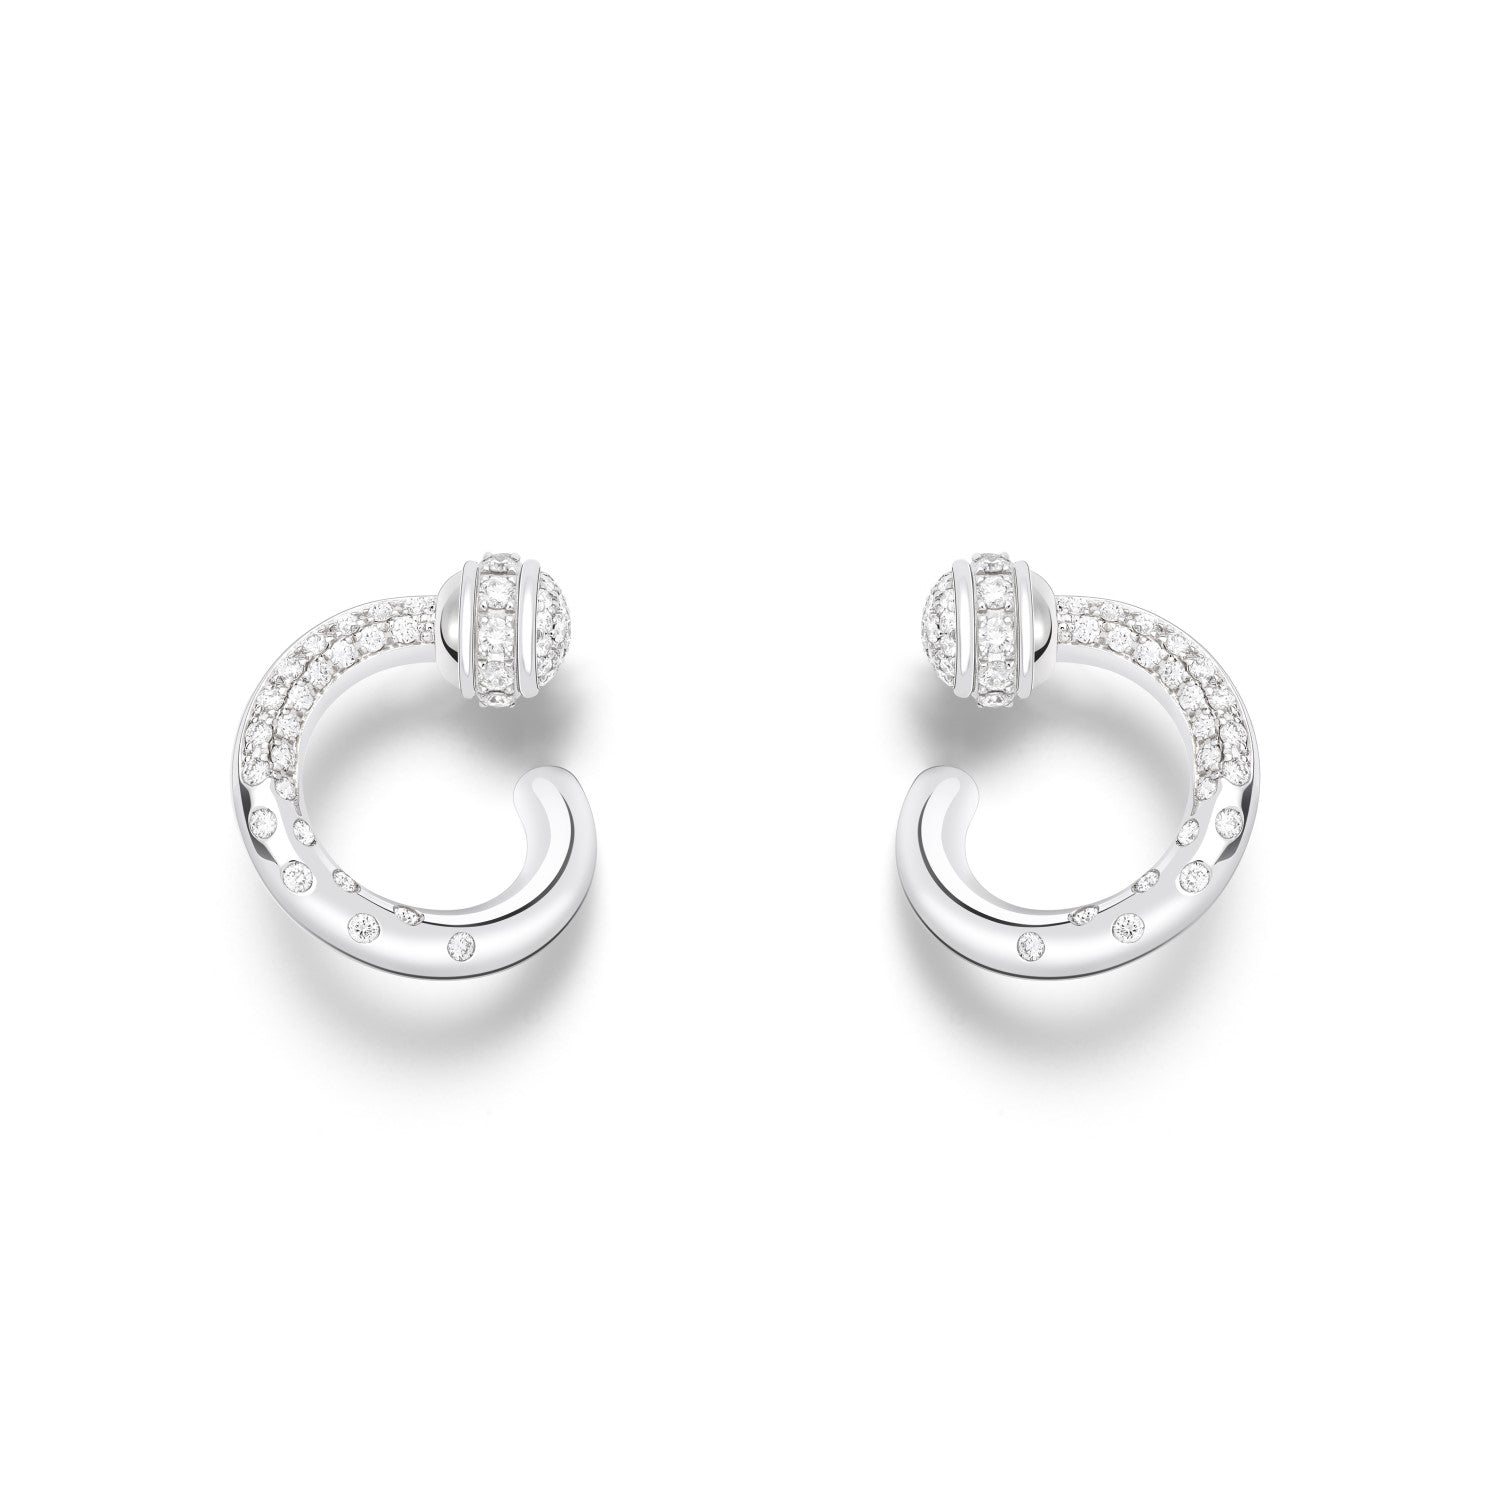 Possession open hoop earrings in 18K white gold set with 104 brilliant-cut diamonds (approx. 0.57 ct).